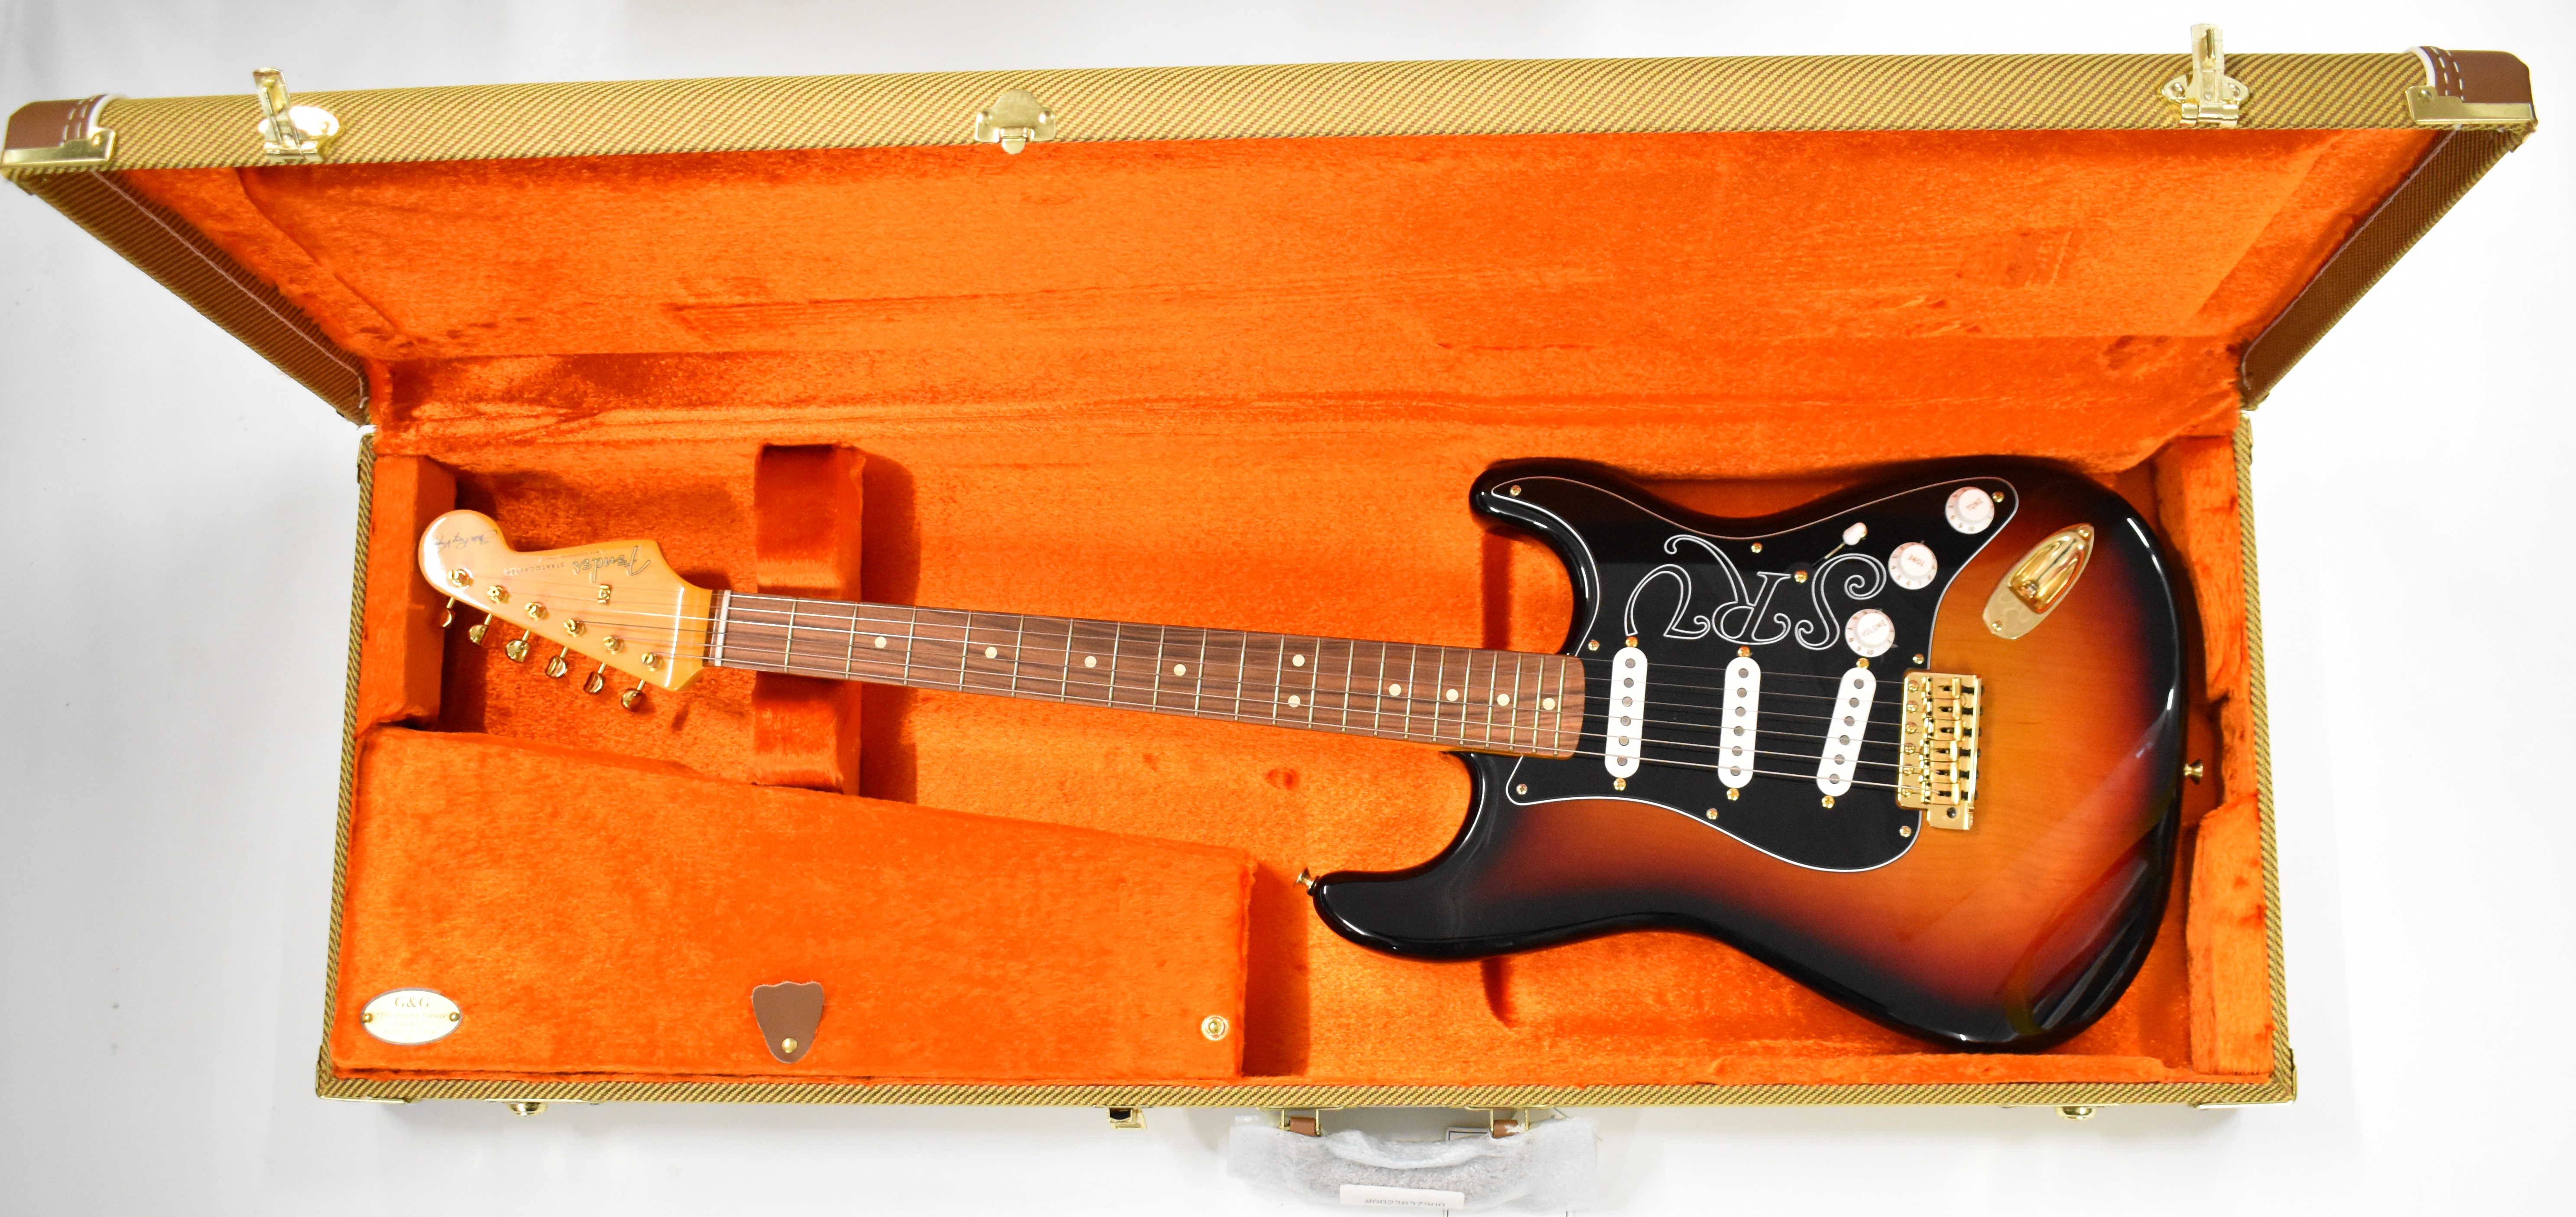 Fender Stevie Ray Vaughan SRV Signature Series Stratocaster electric guitar in 3 tone sunburst - Image 8 of 8